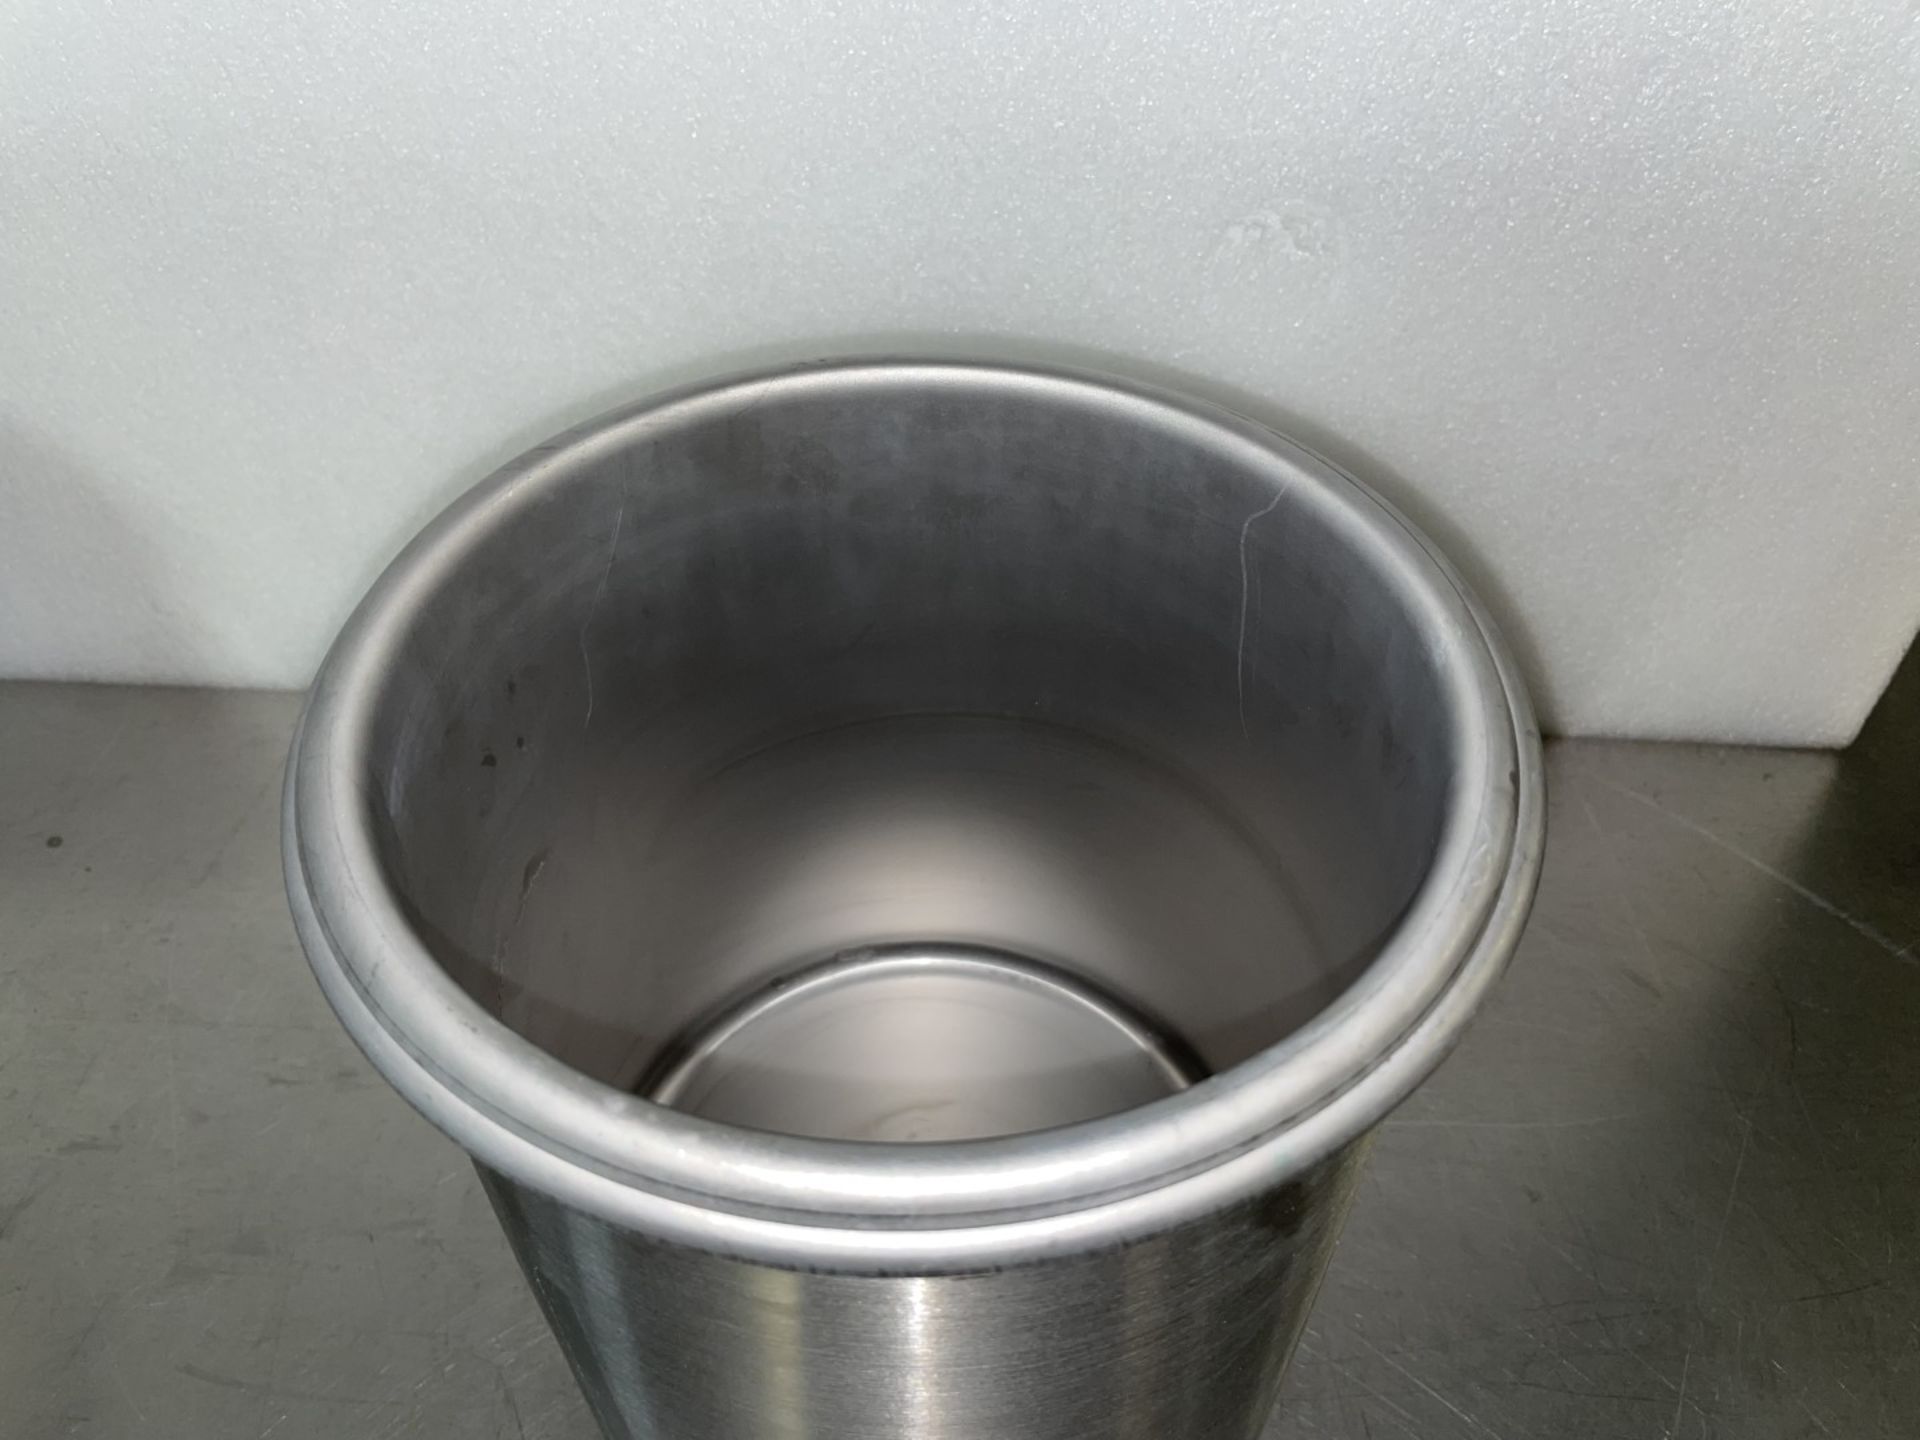 Lot of (2) 6 qt/5.68 L Polar Ware Stainless Steel Beakers - Image 3 of 3